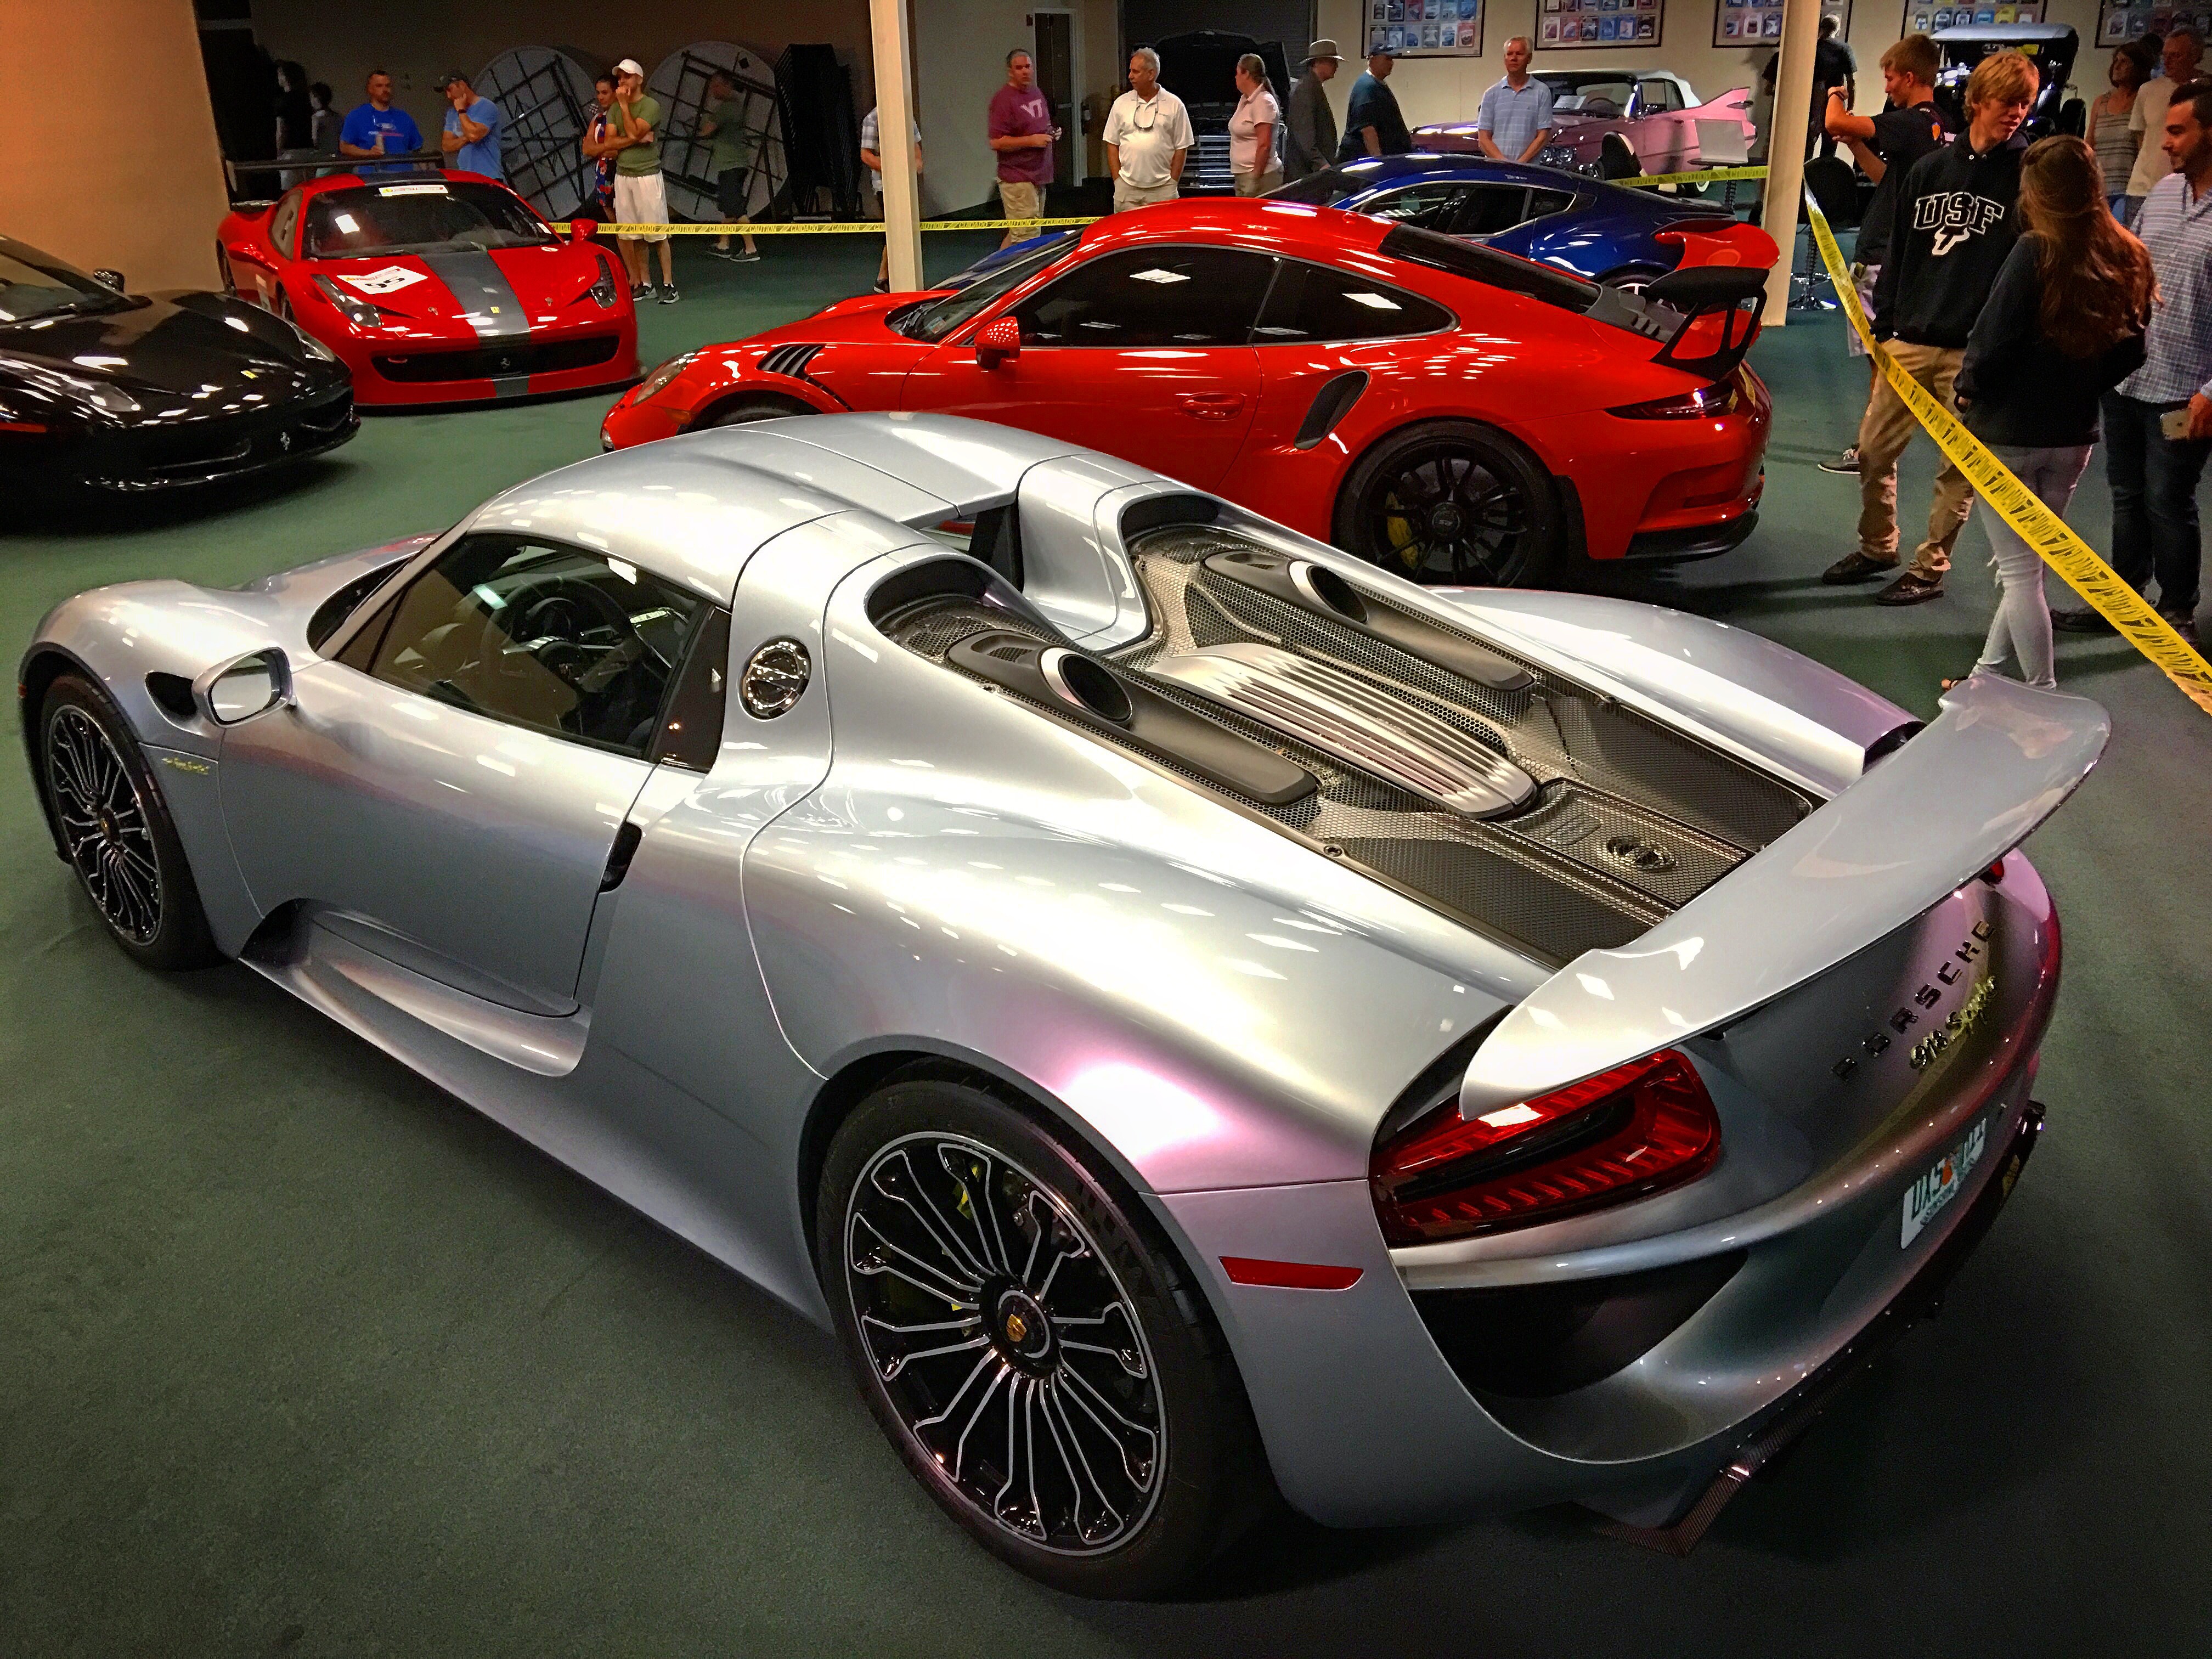 Porsche 918 Spyder in silver, because the police never notice silver cars.